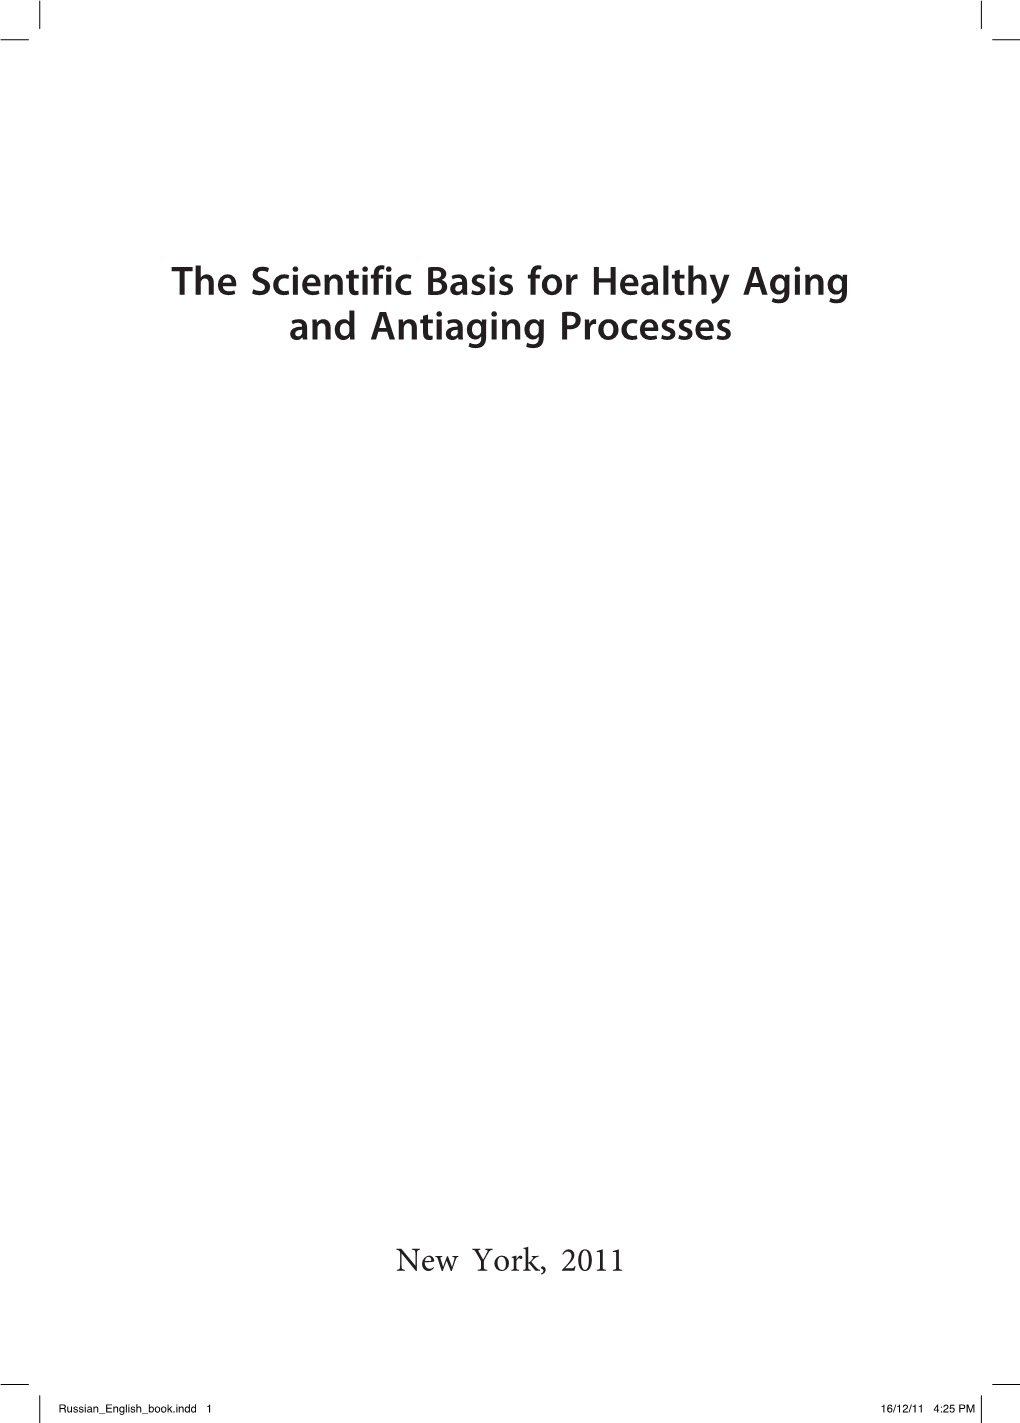 The Scientific Basis for Healthy Aging and Antiaging Processes